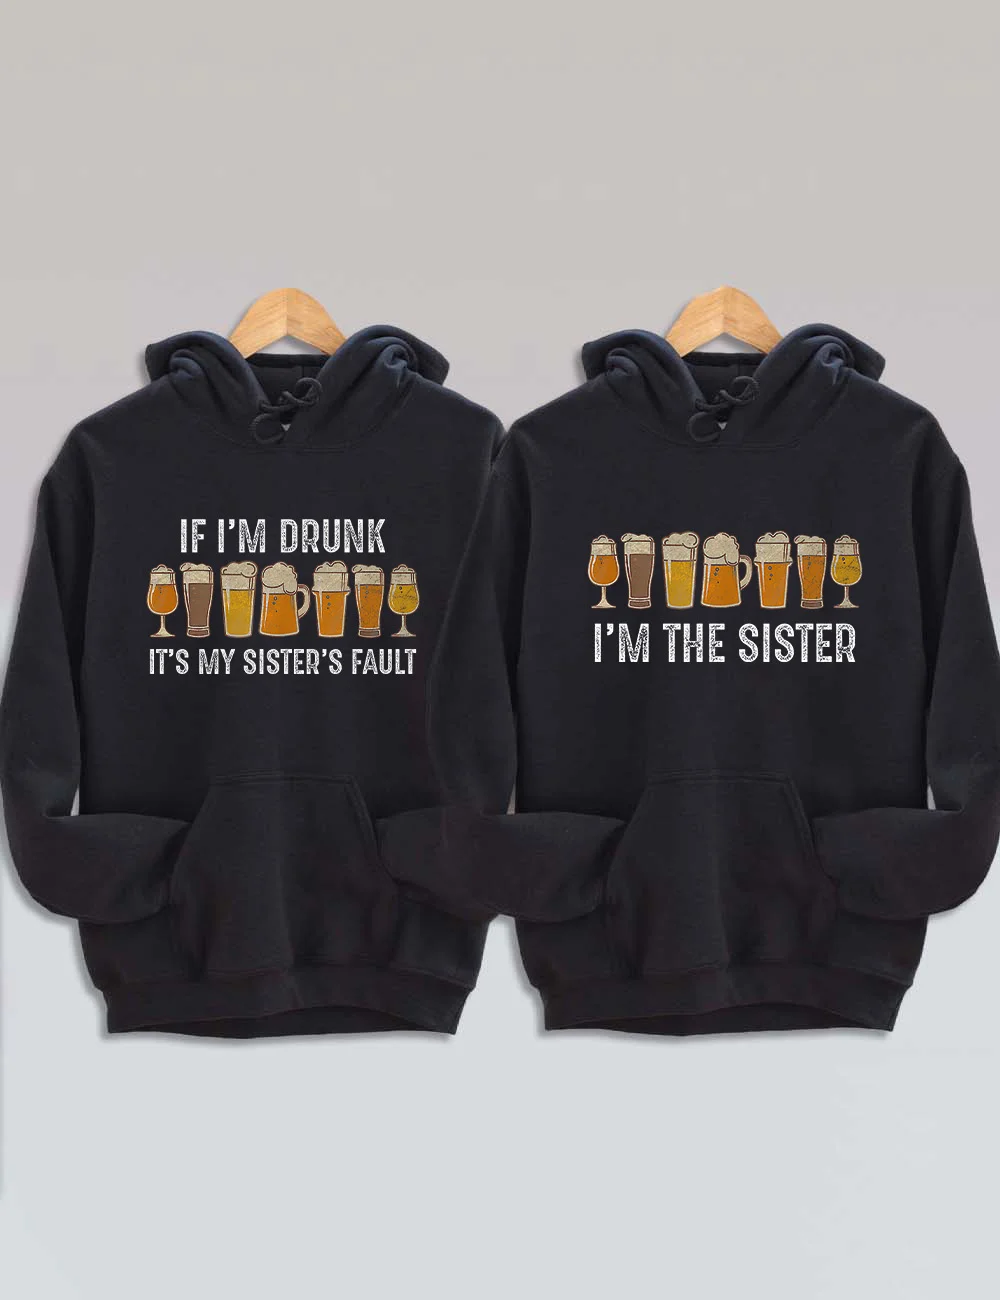 If I'm Drunk It's My Sister's Fault Hoodie